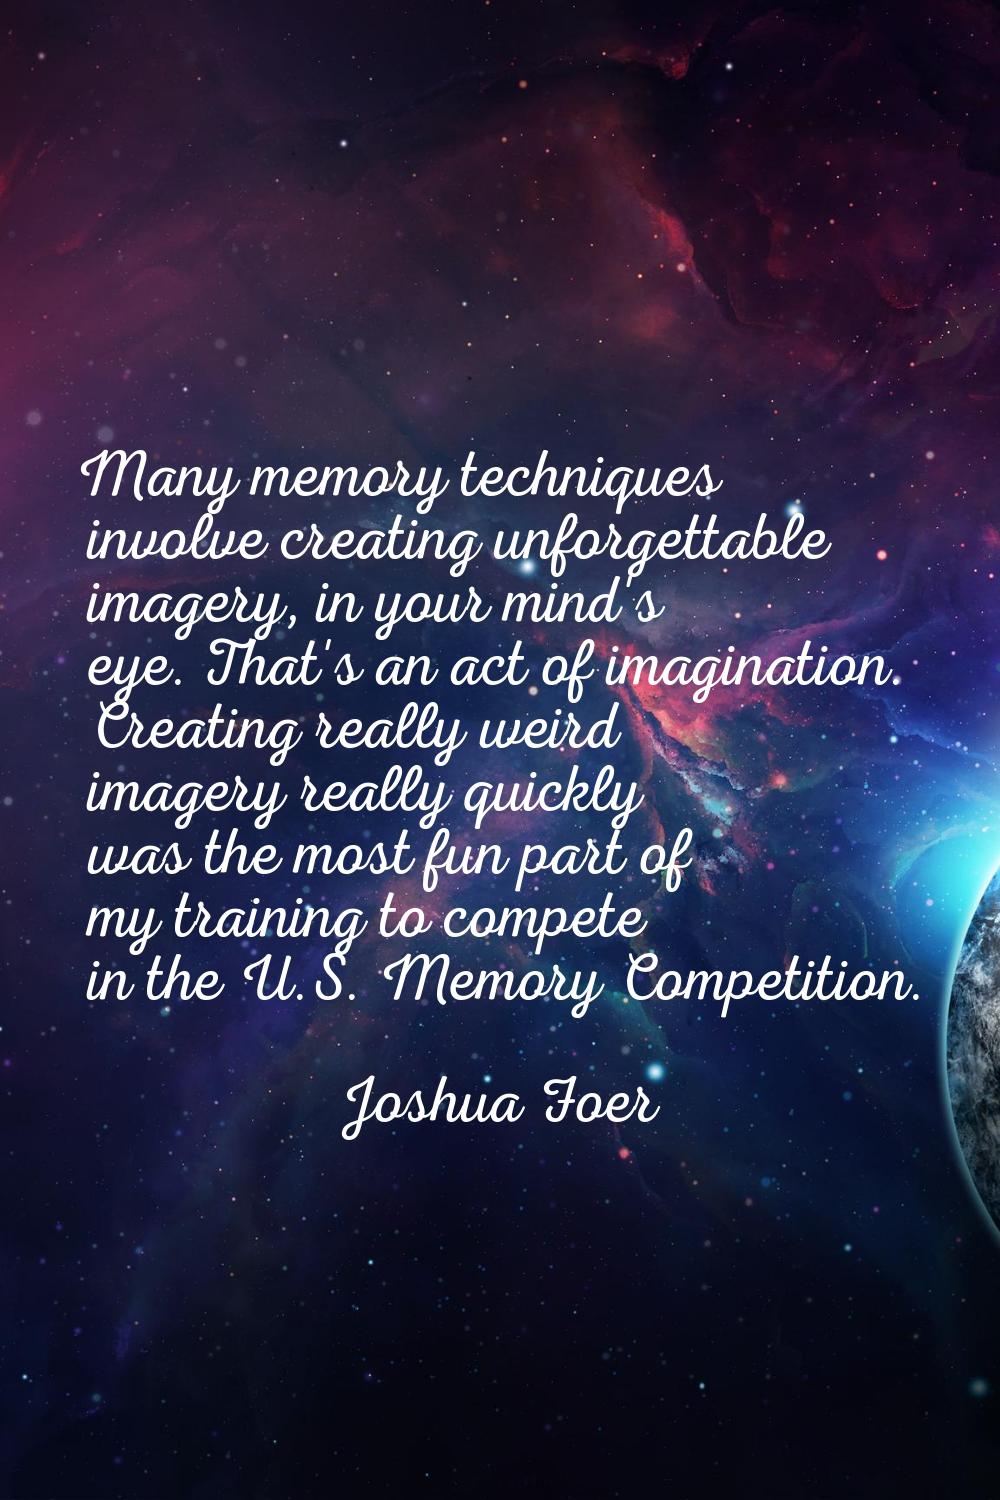 Many memory techniques involve creating unforgettable imagery, in your mind's eye. That's an act of